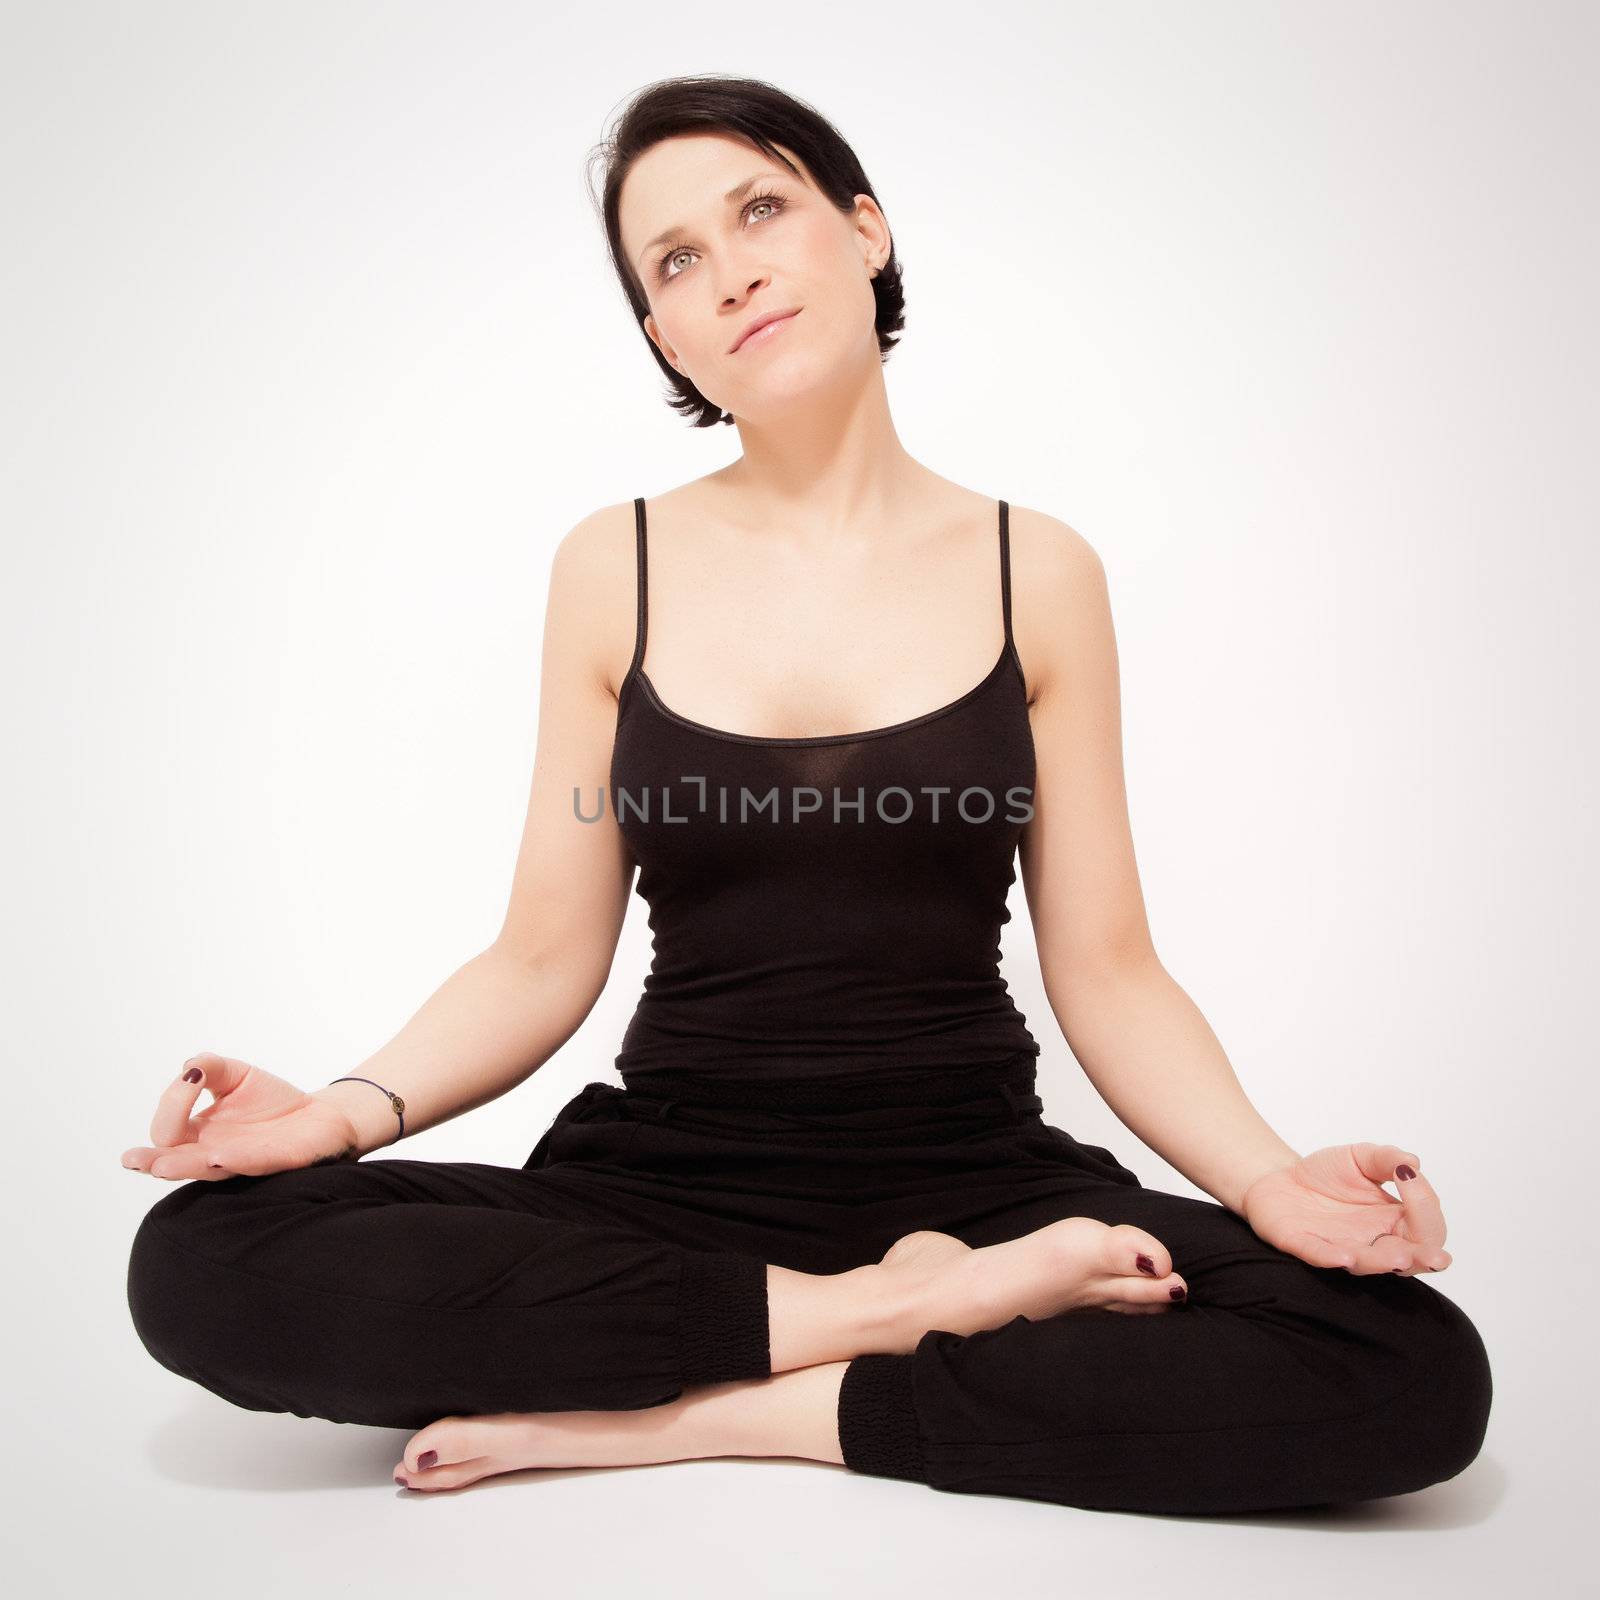 An image of a pretty woman doing yoga at home